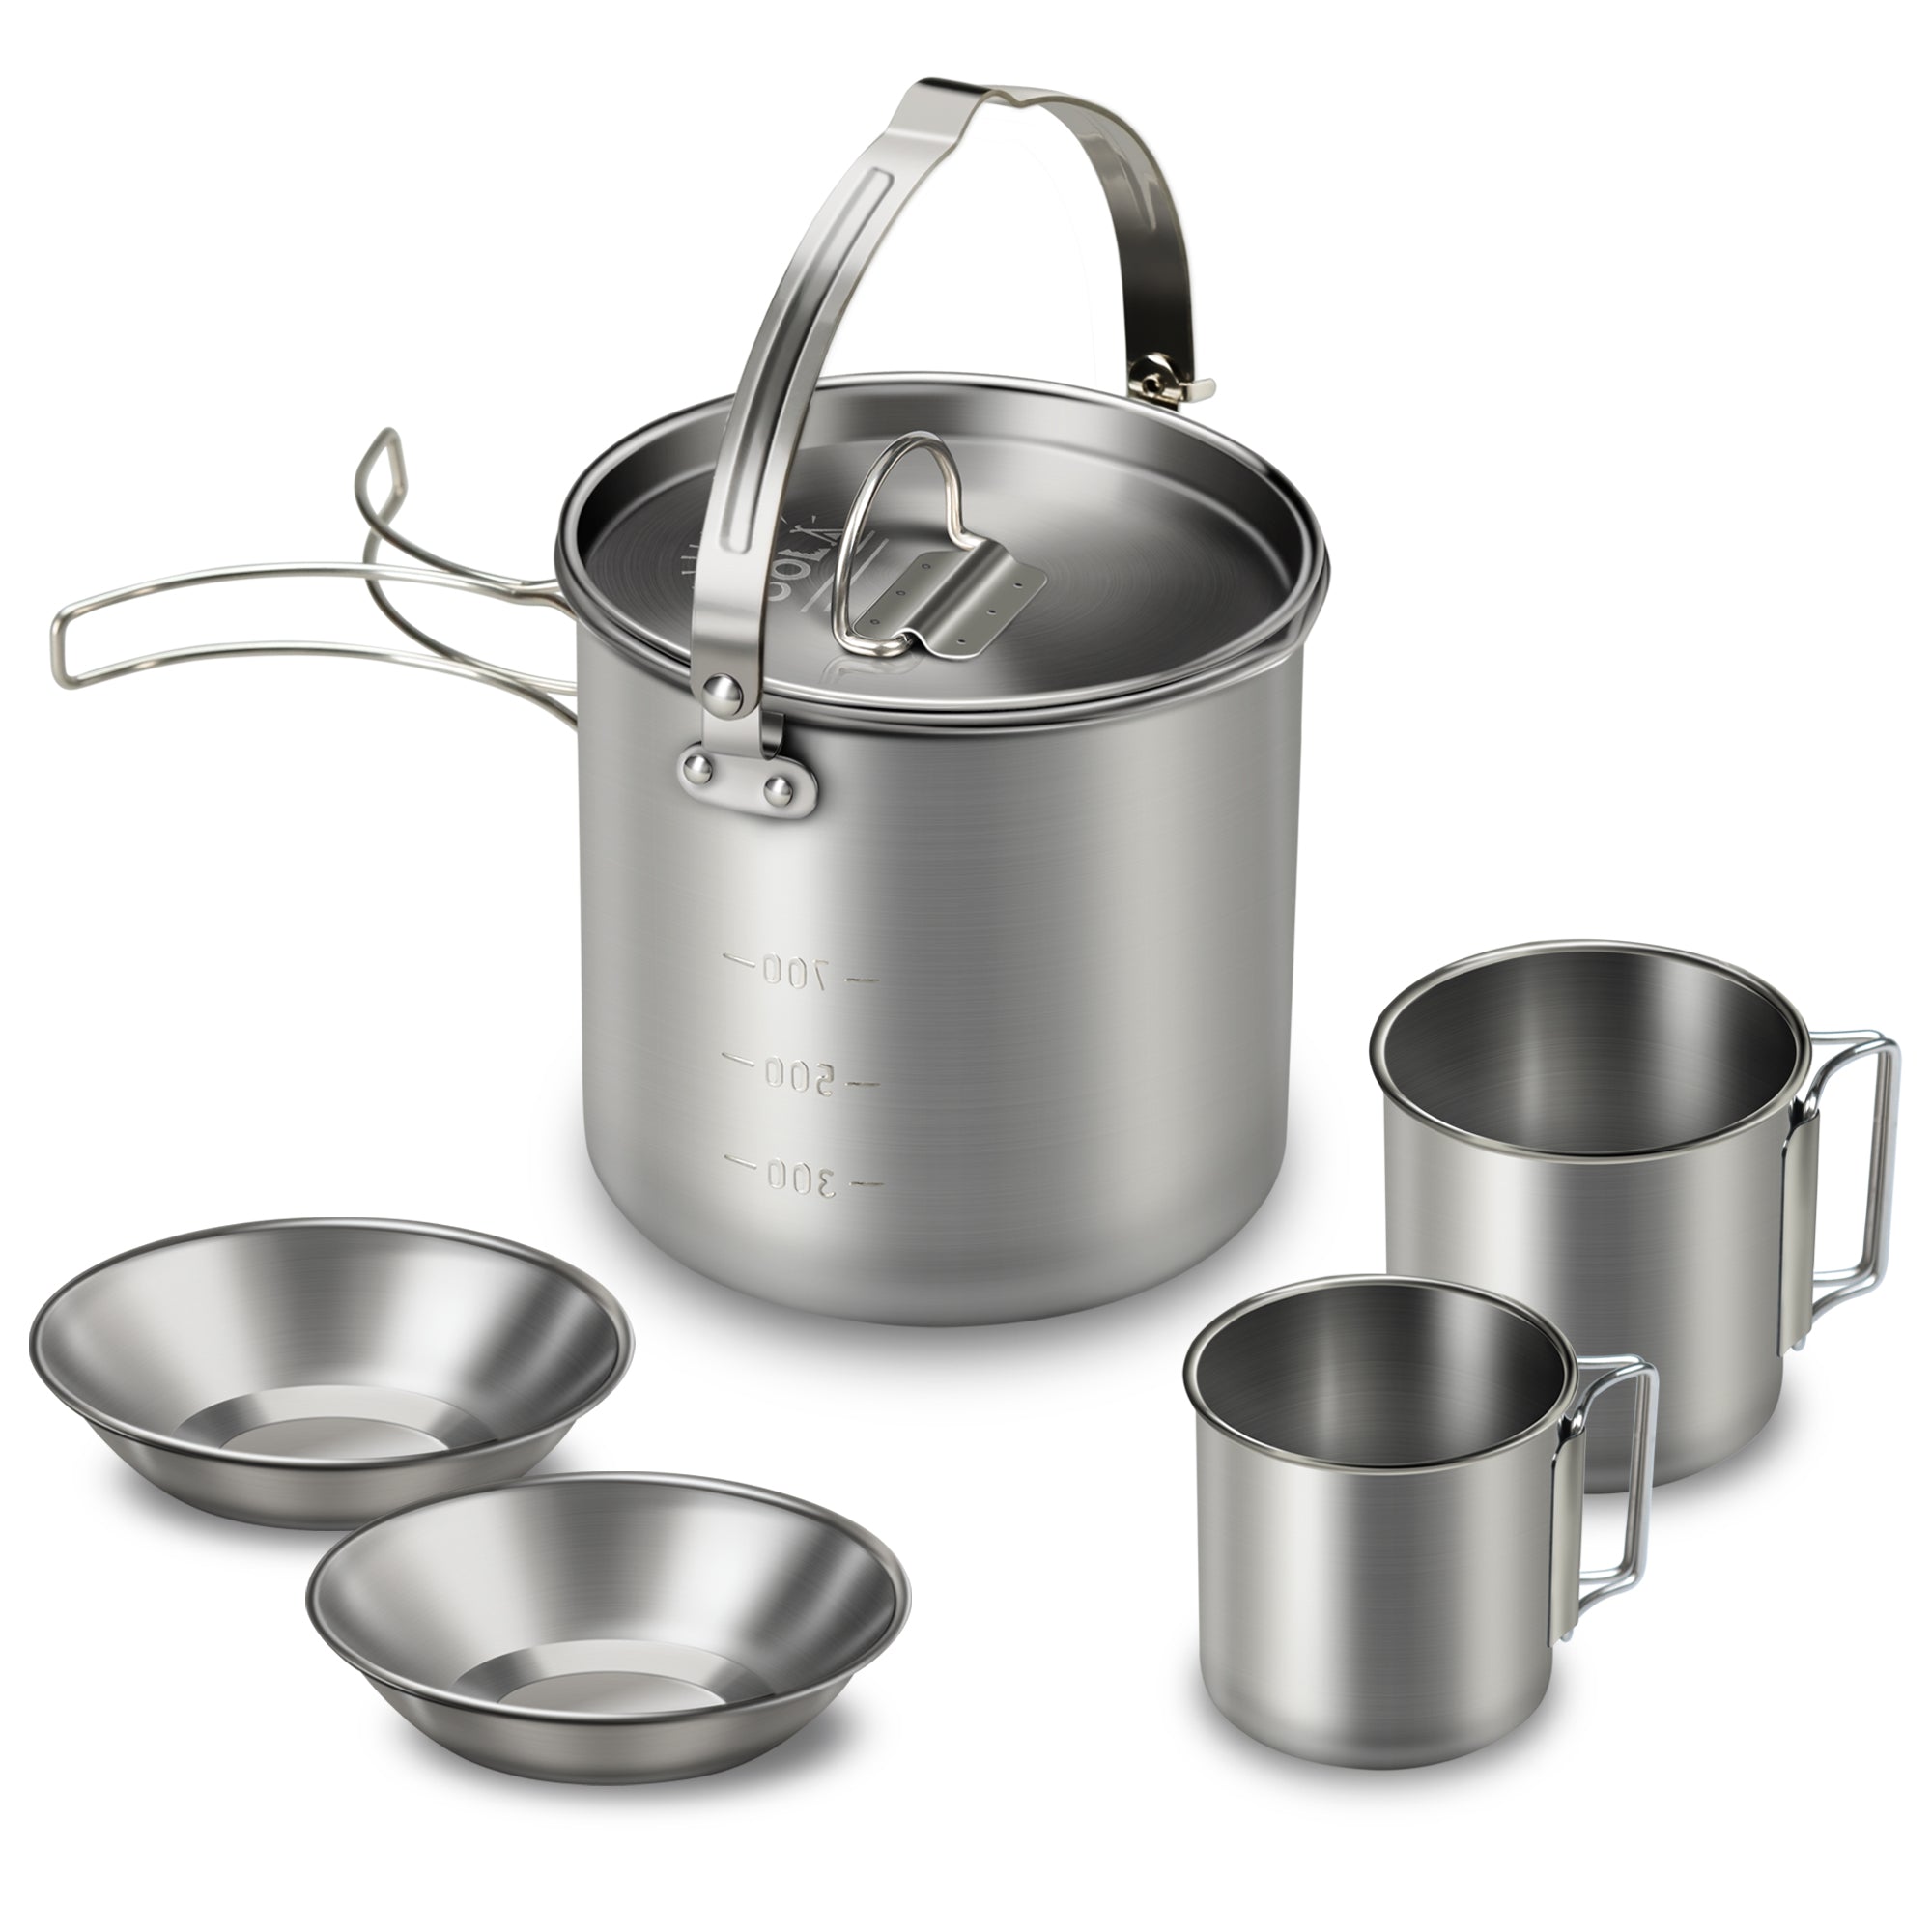 Tomfoto 5PCS Stainless Steel Kettle with 2 Cups 2 Bowls Foldable Handles Lid Large Capacity Portable Tea Coffee Water Cooking Pot for Camping Hiking Picnic Outdoors